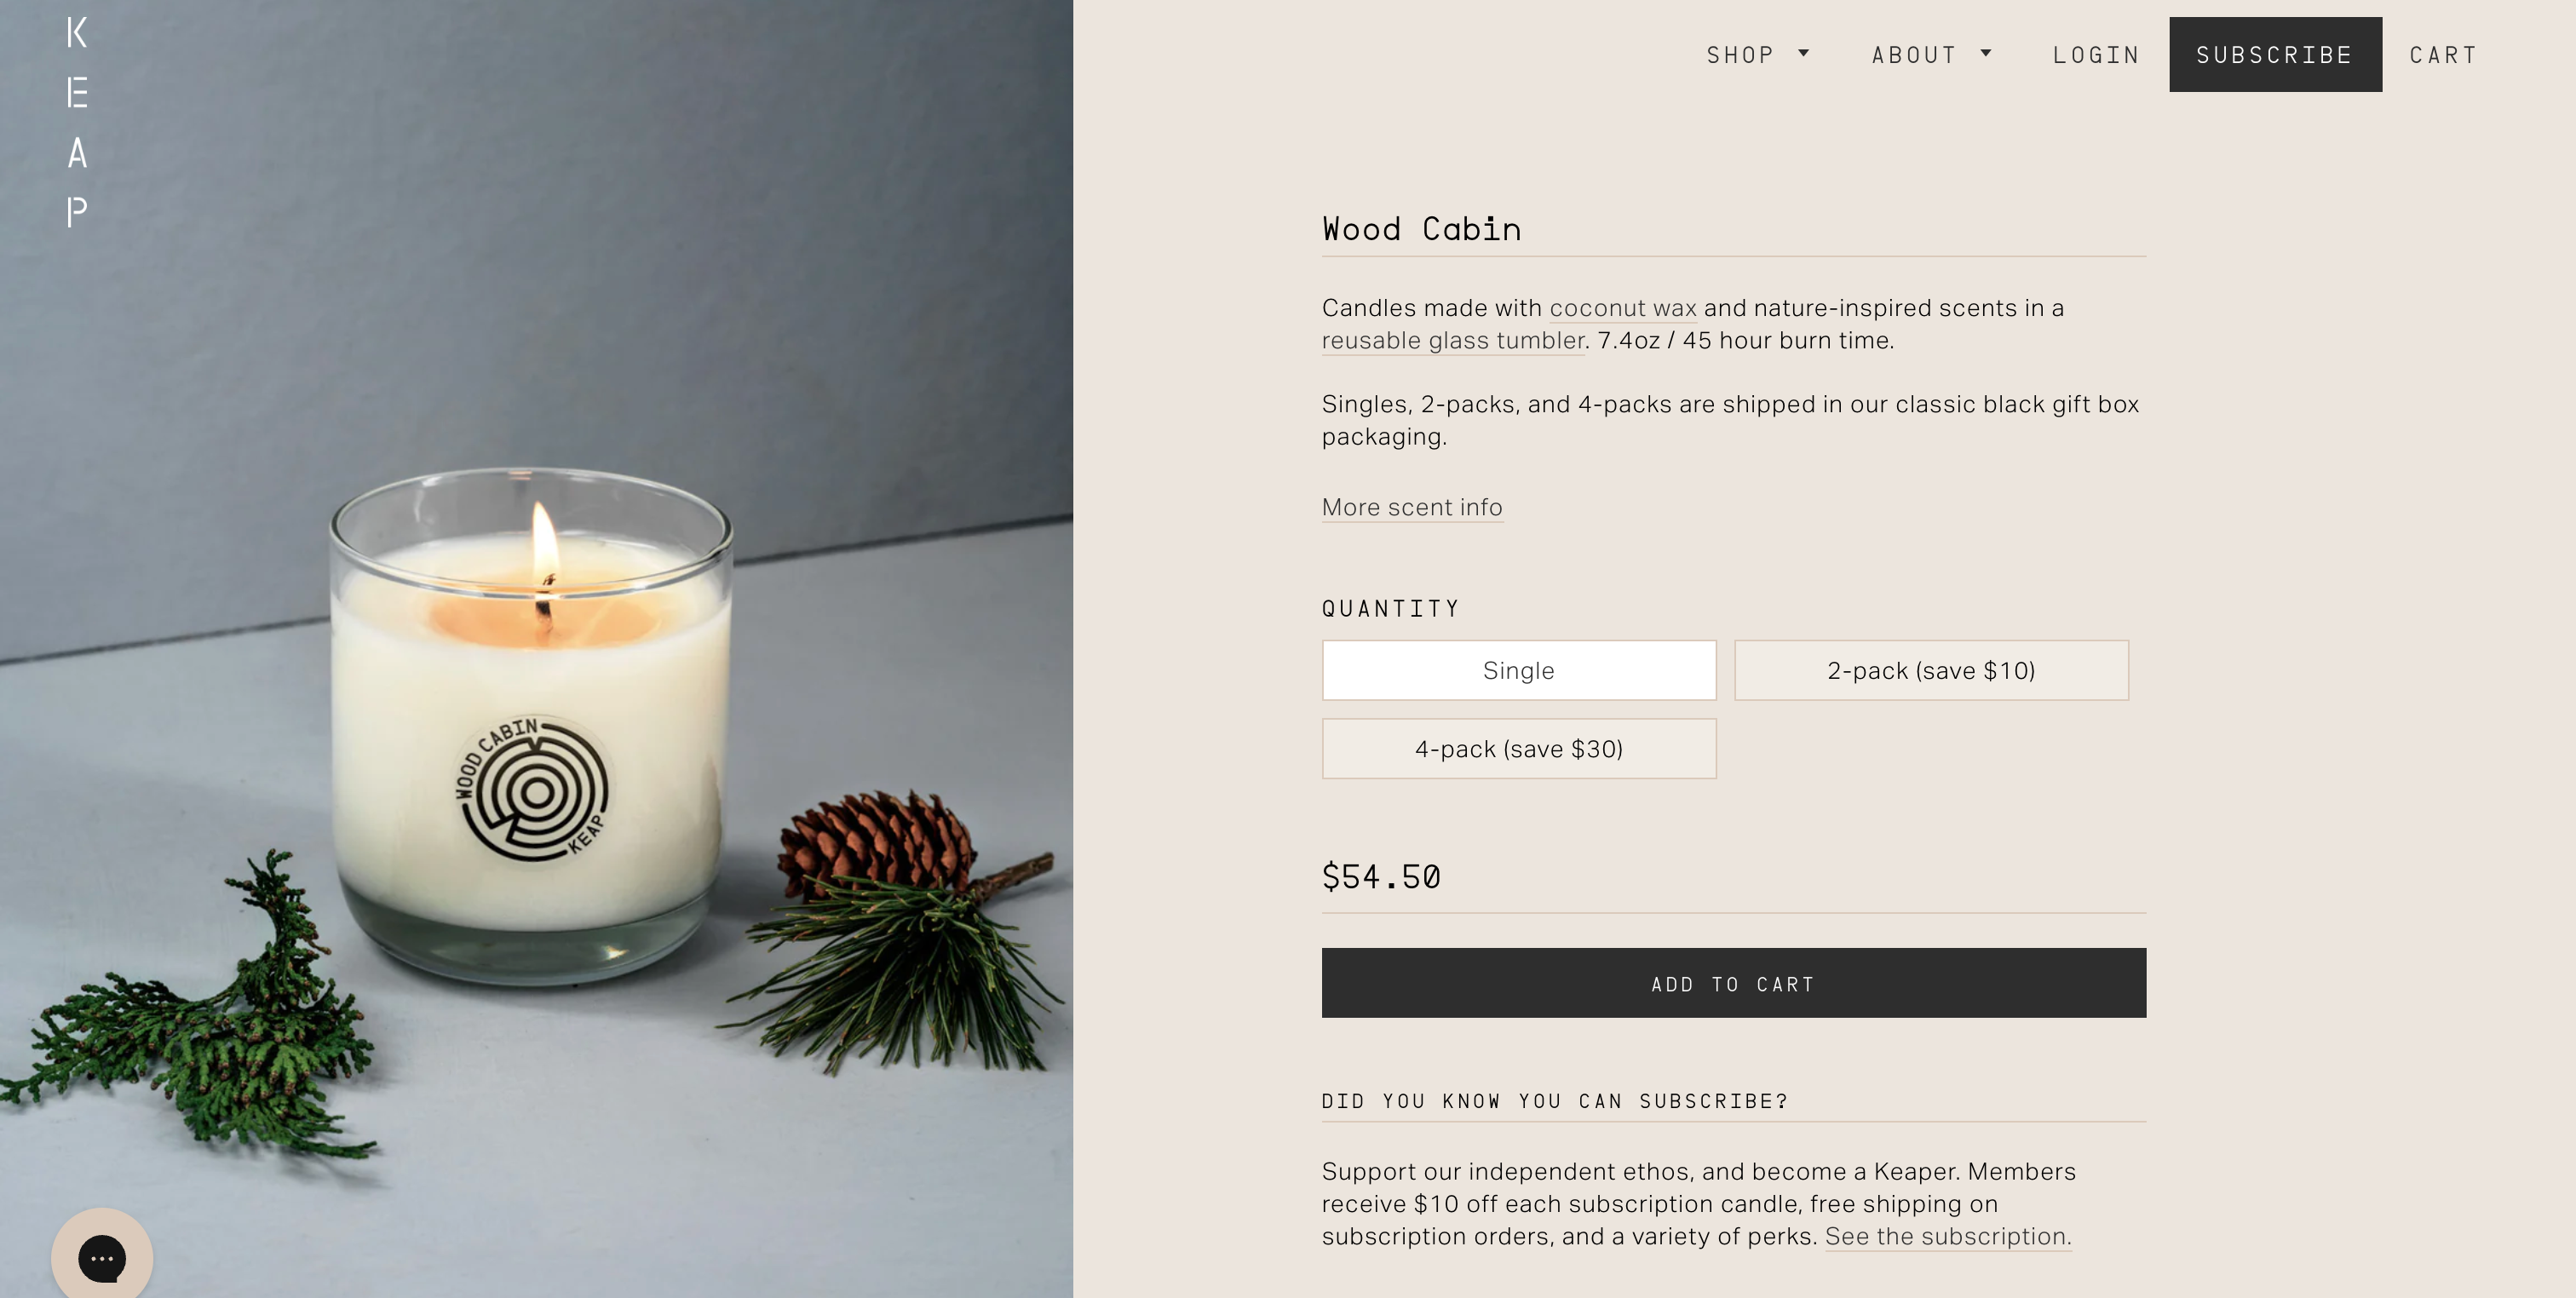 A product page by Keap candles, promoting the brand's Wood Cabin candle scent.